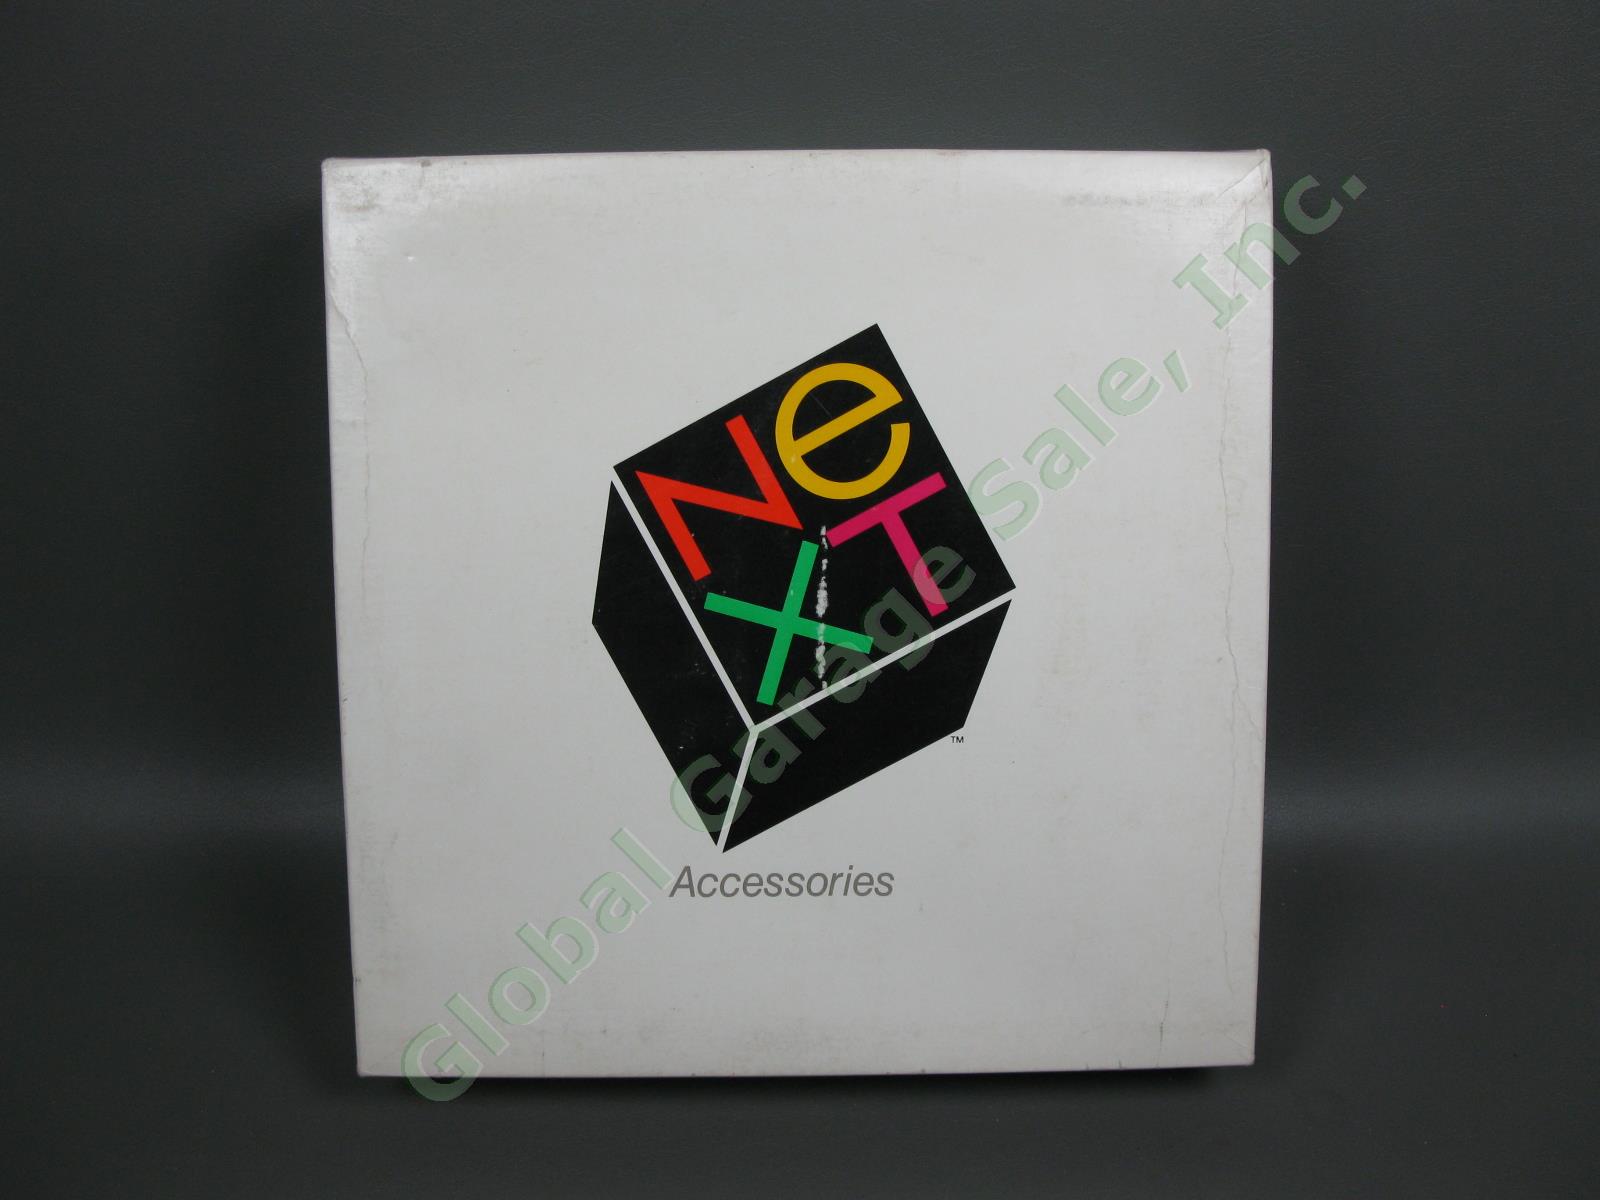 RARE Next Cube Computer System Accessories Boxed Media Release Kit Lot Apple NR 1